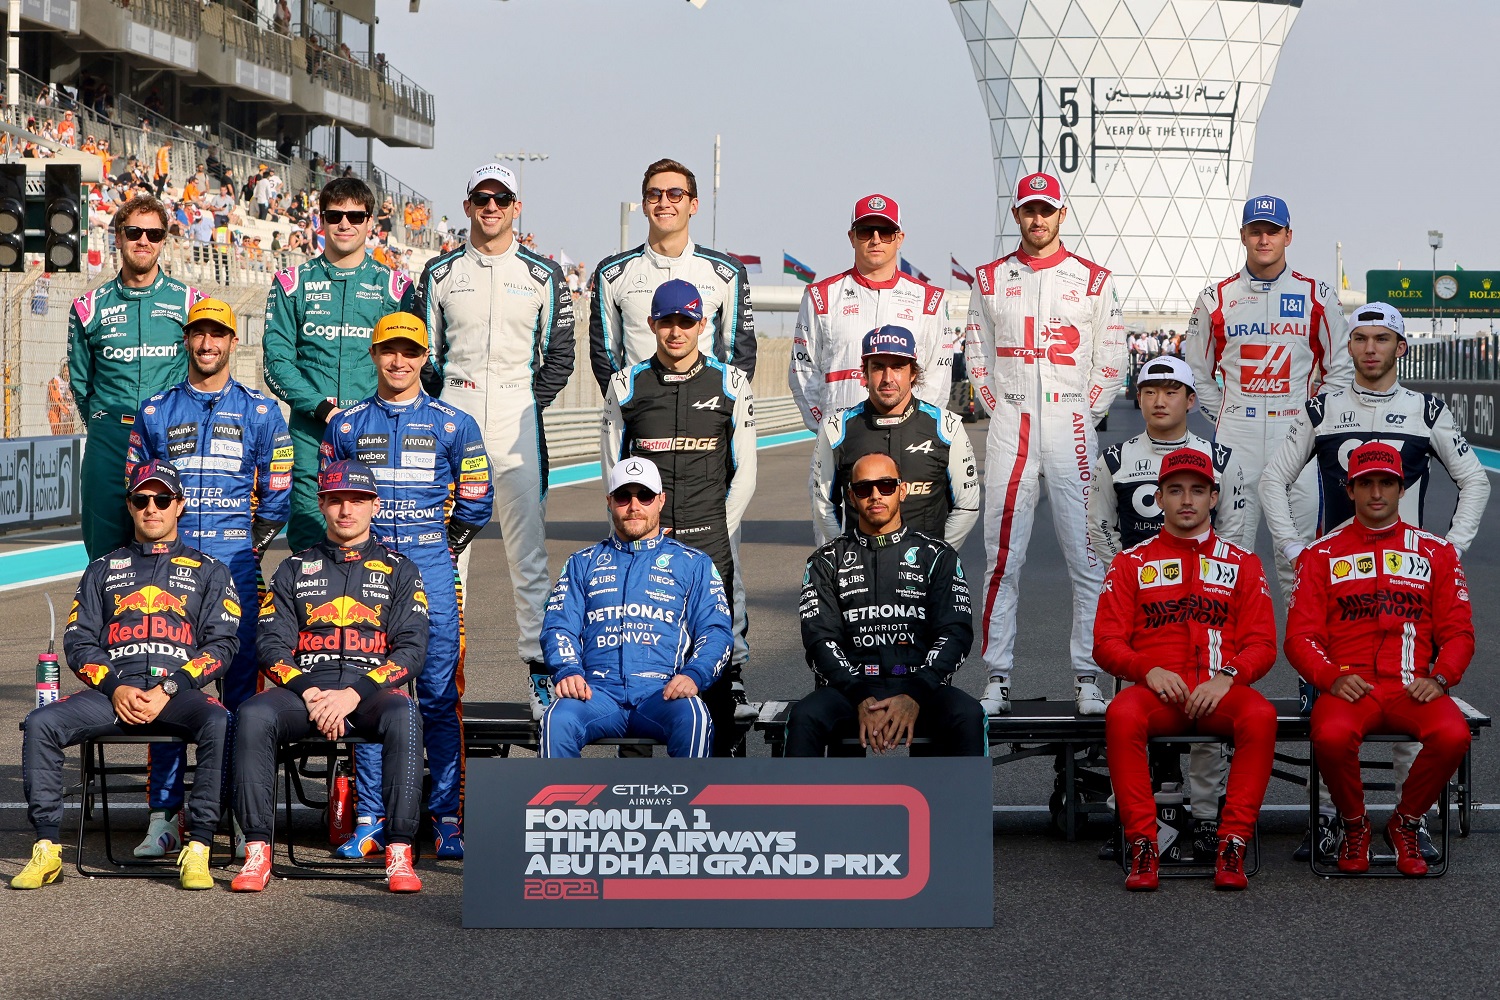 Drivers pose for a picture at the Yas Marina Circuit before the Abu Dhabi Formula 1 Grand Prix on Dec. 12, 2021. | Giuseppe Cacace / AFP via Getty Images